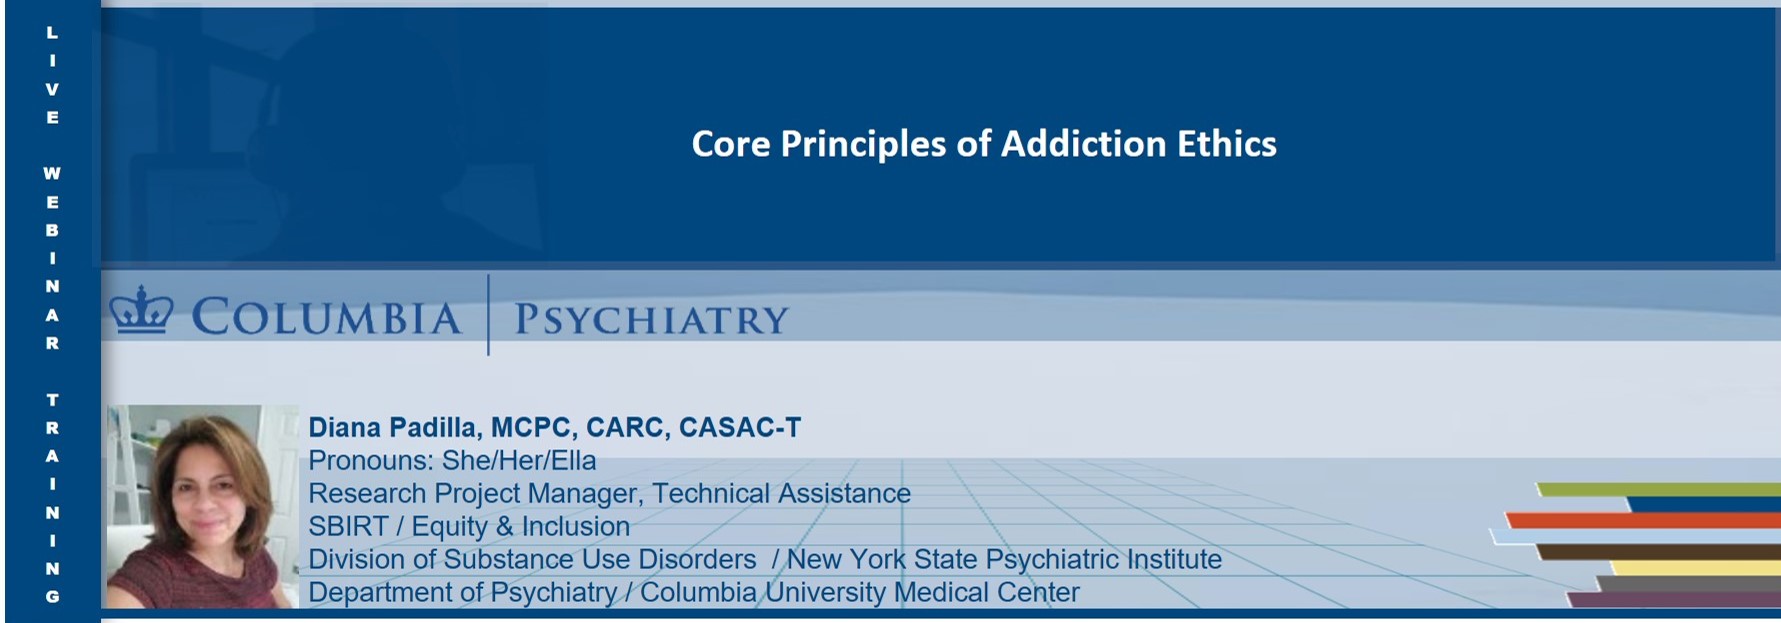 Core Principles of Addiction Counselor Ethics